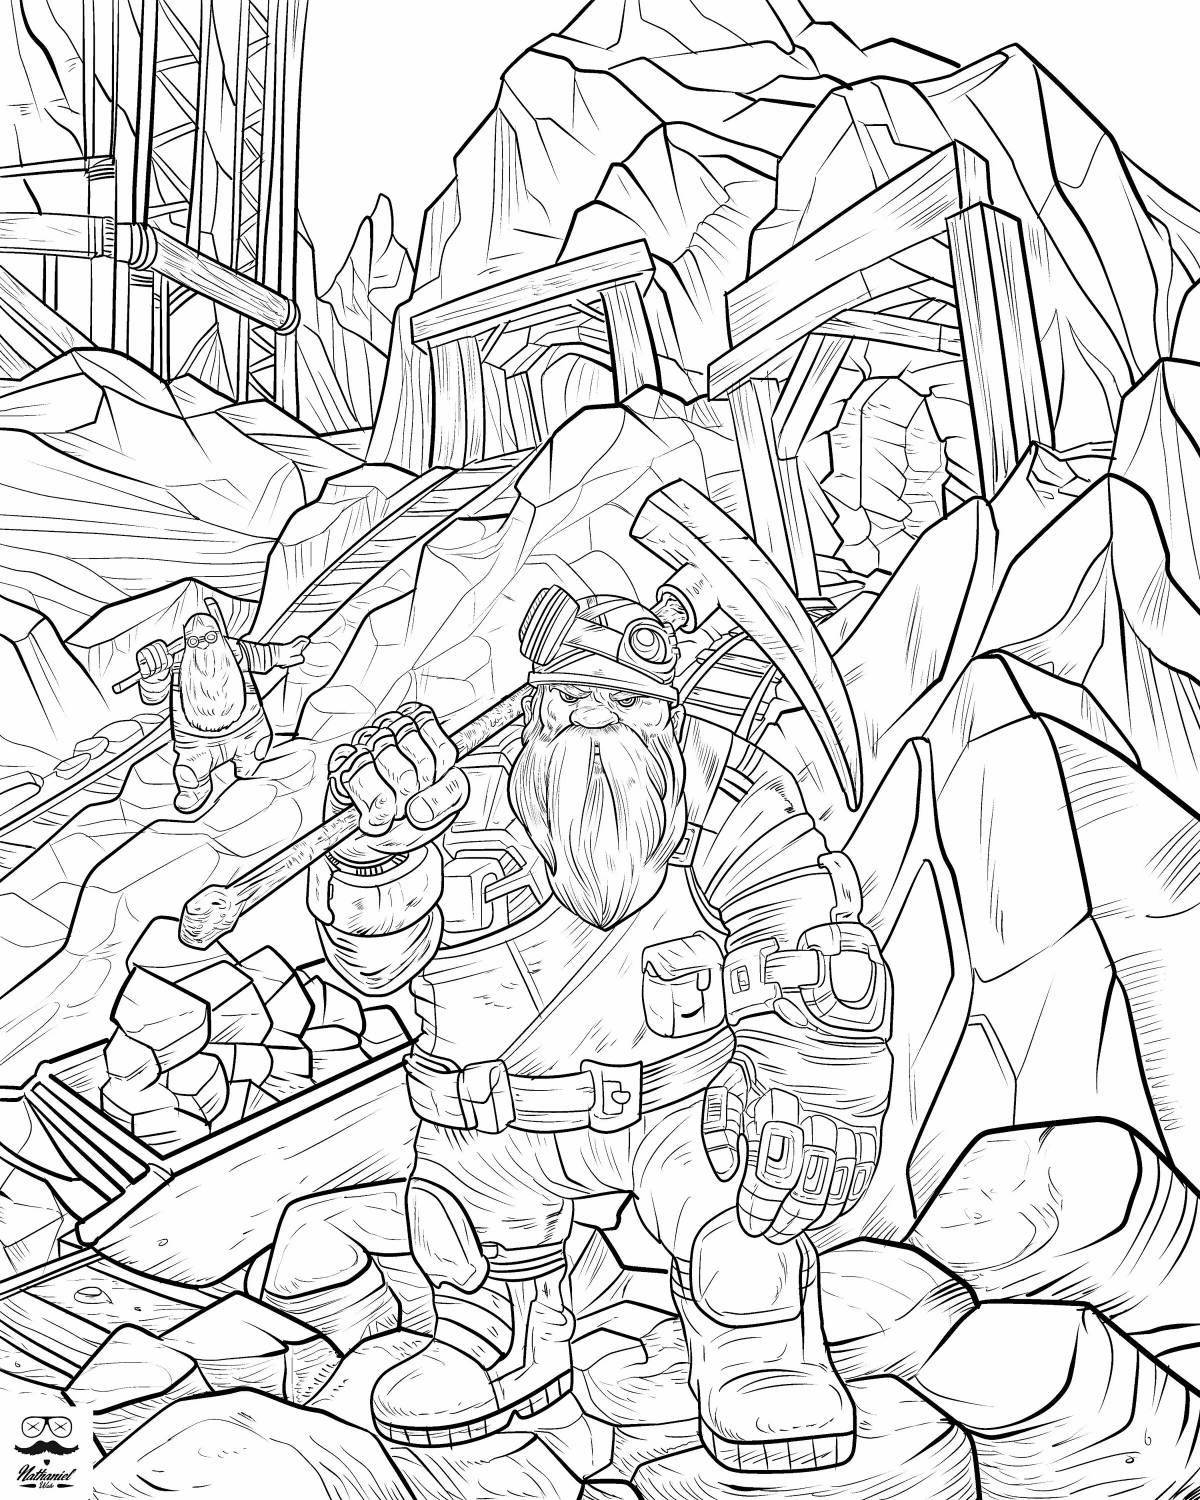 Marvelous warcraft 3 coloring book